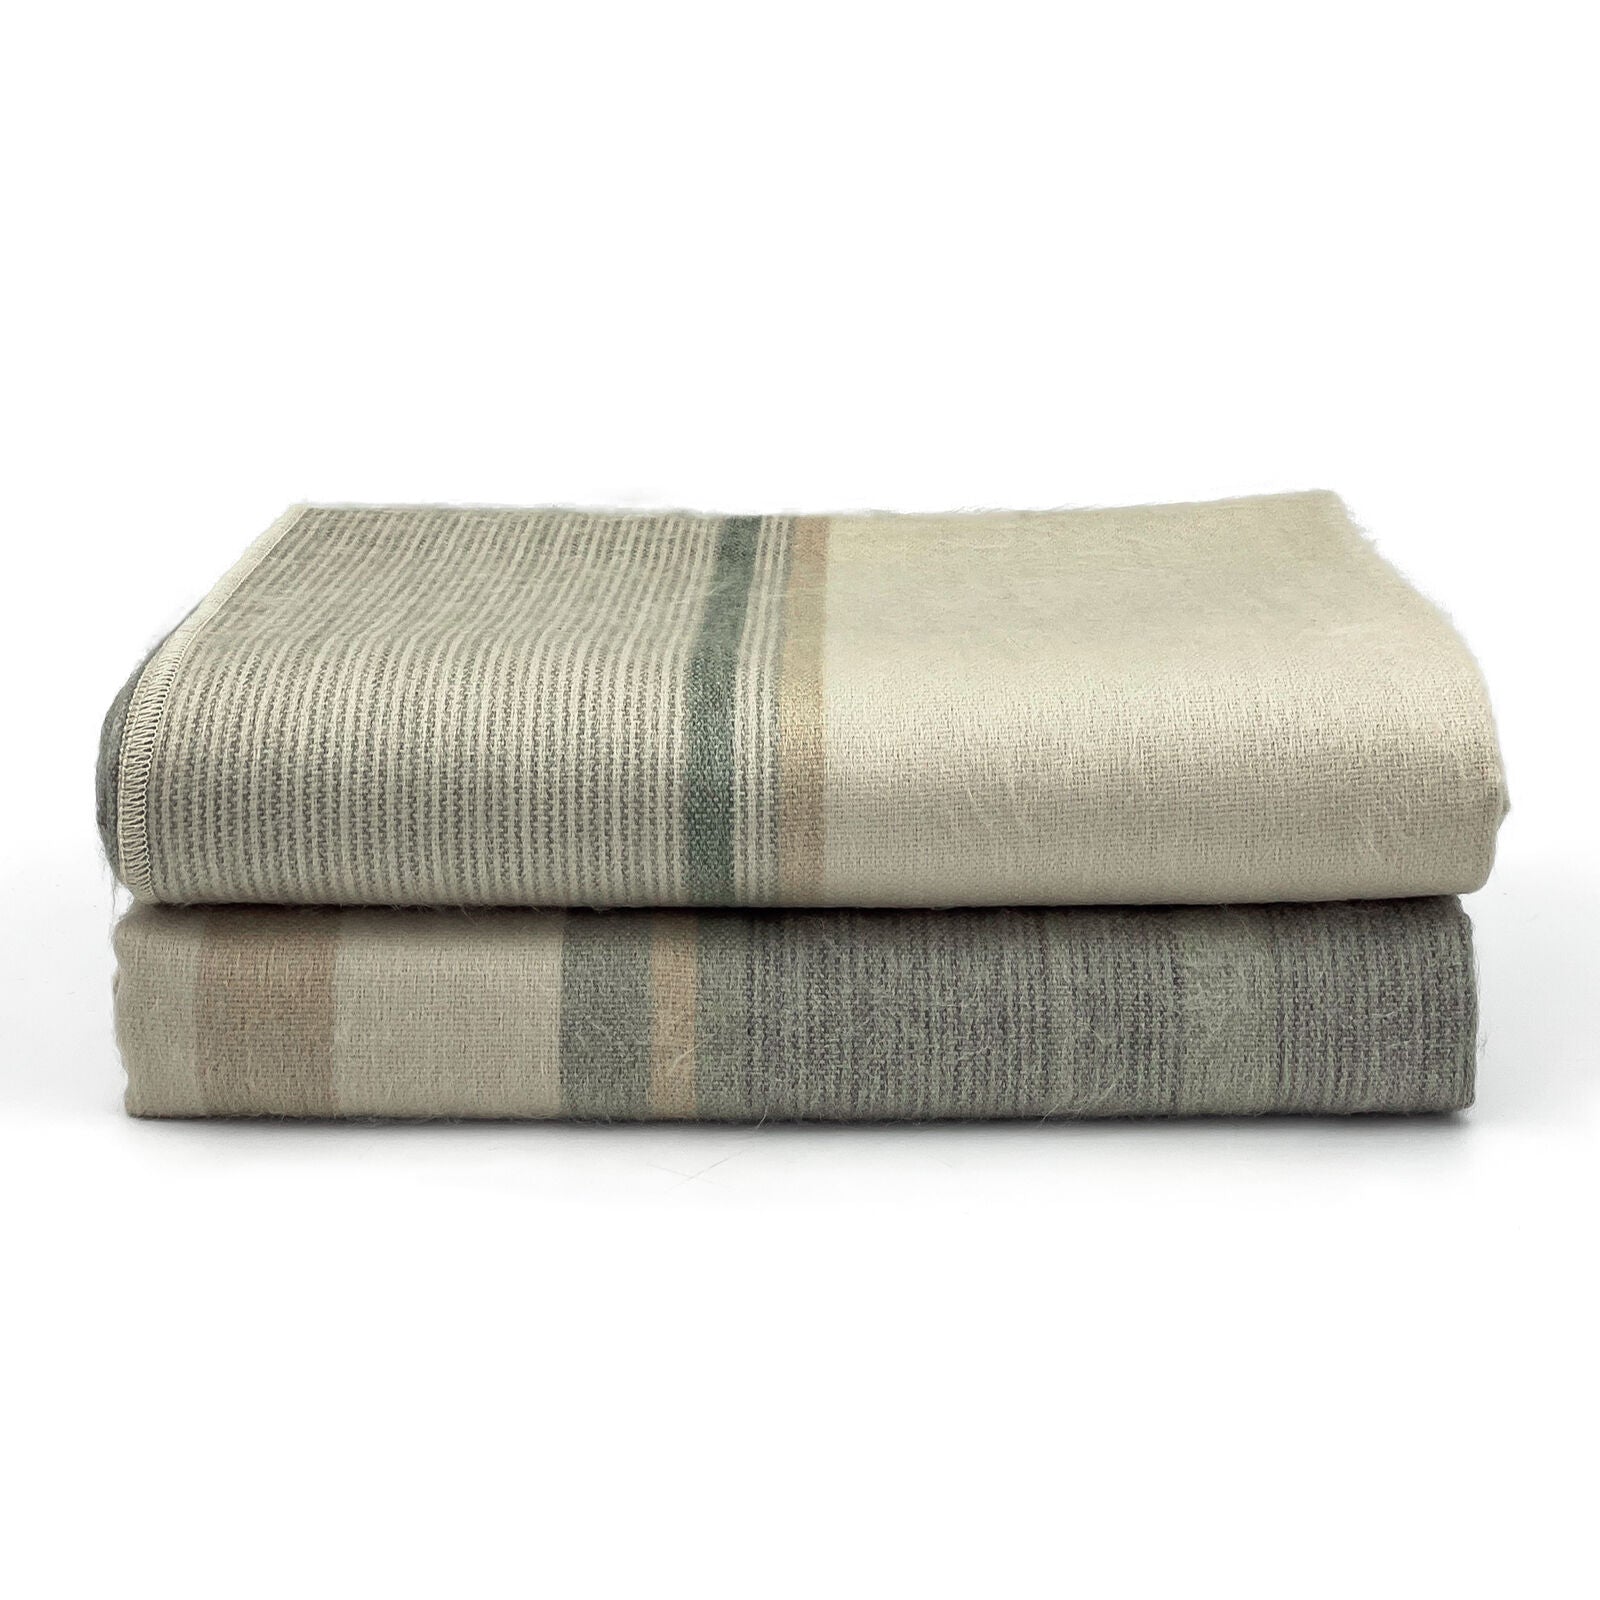 Deleg - Baby Alpaca Wool Throw Blanket / Sofa Cover - Queen 93" x 66" - natural colored stripes pattern